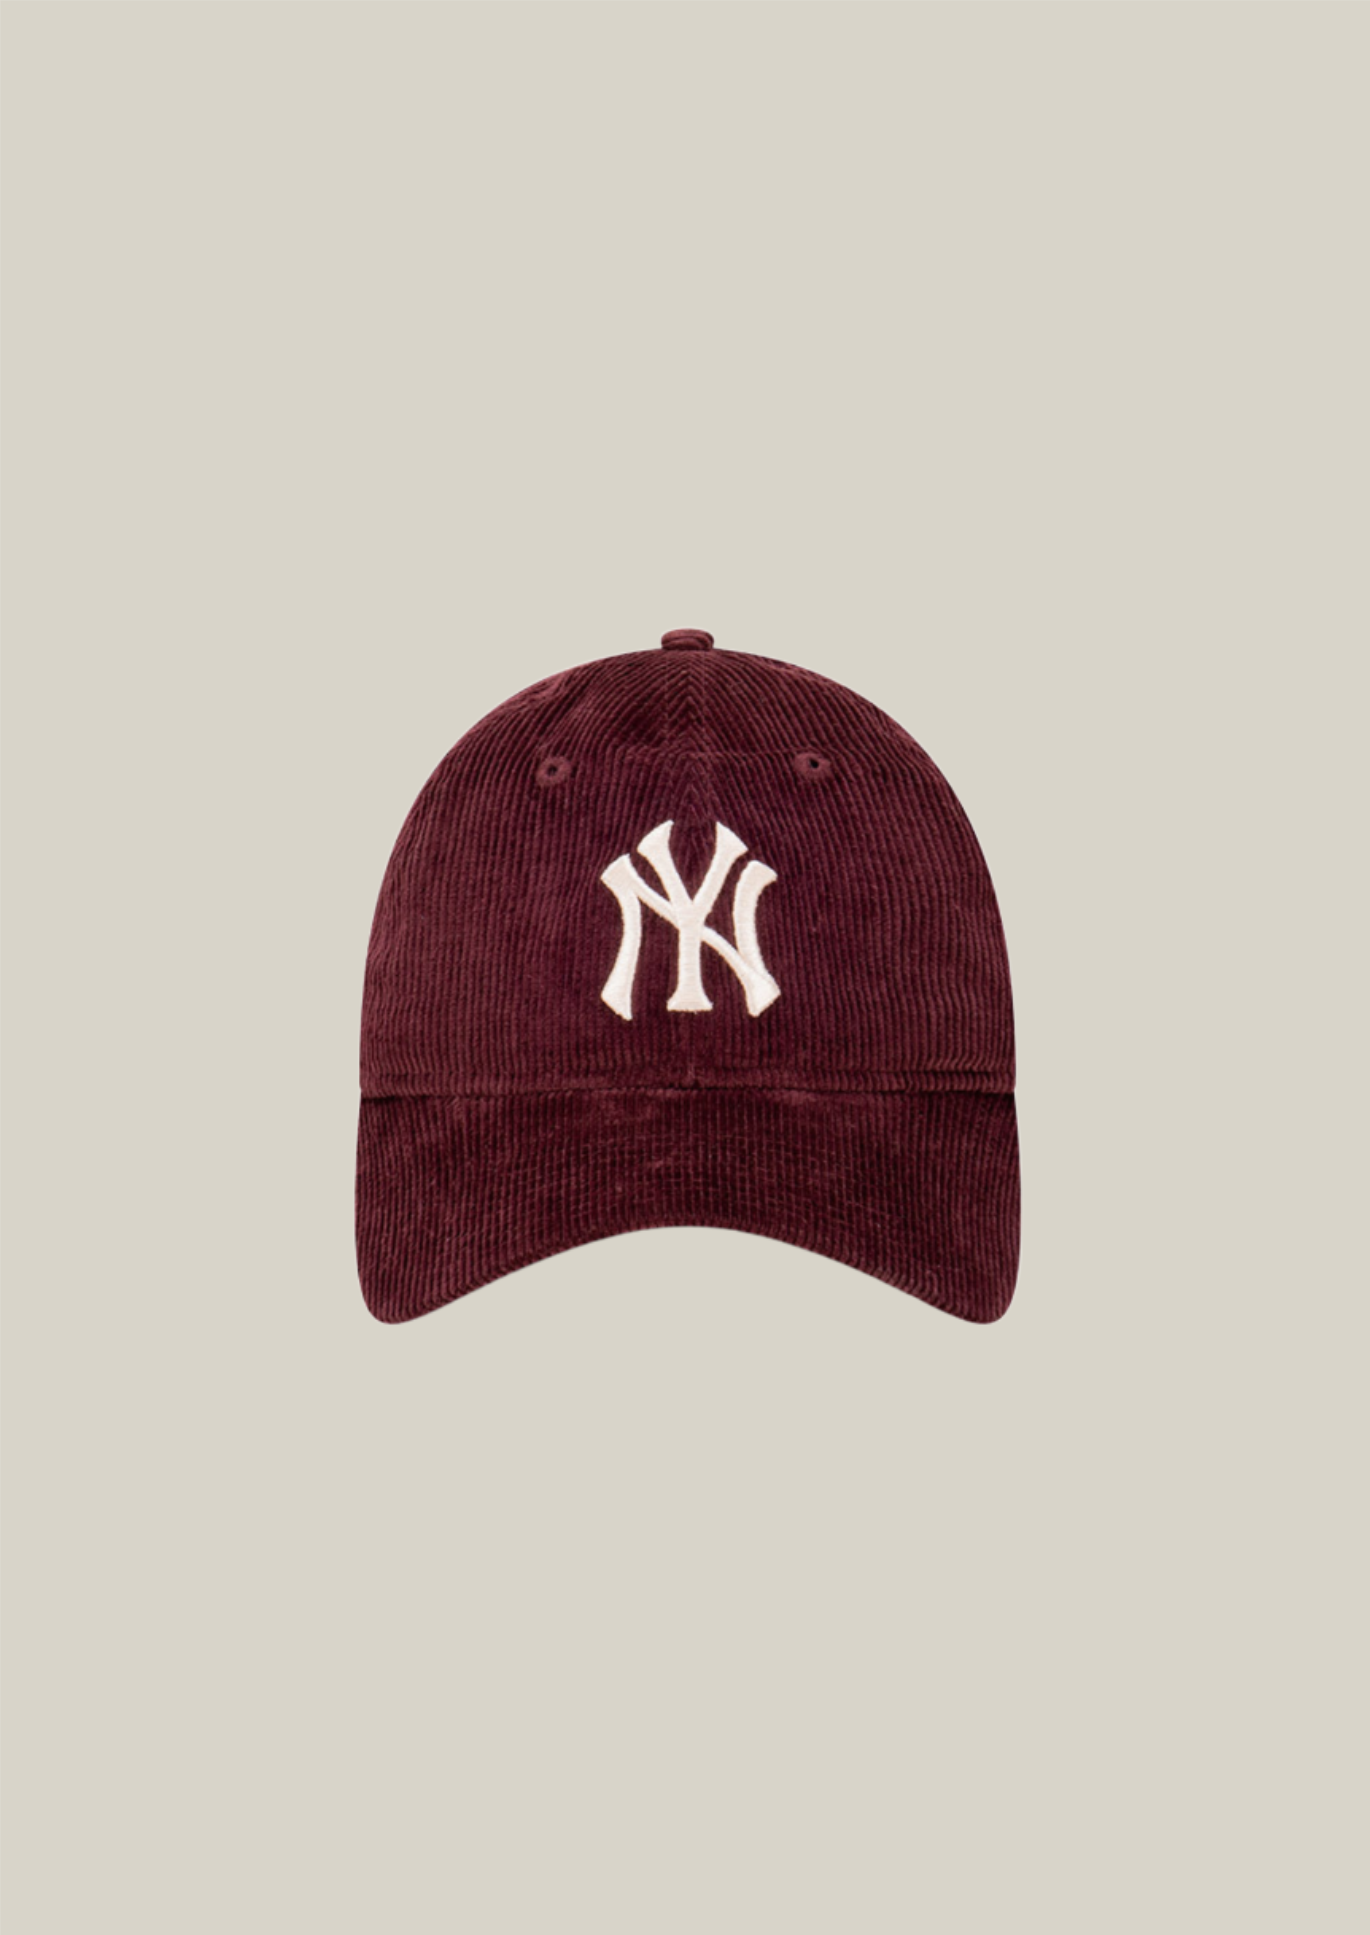 New Era 9Forty Cord Snap Back - Port